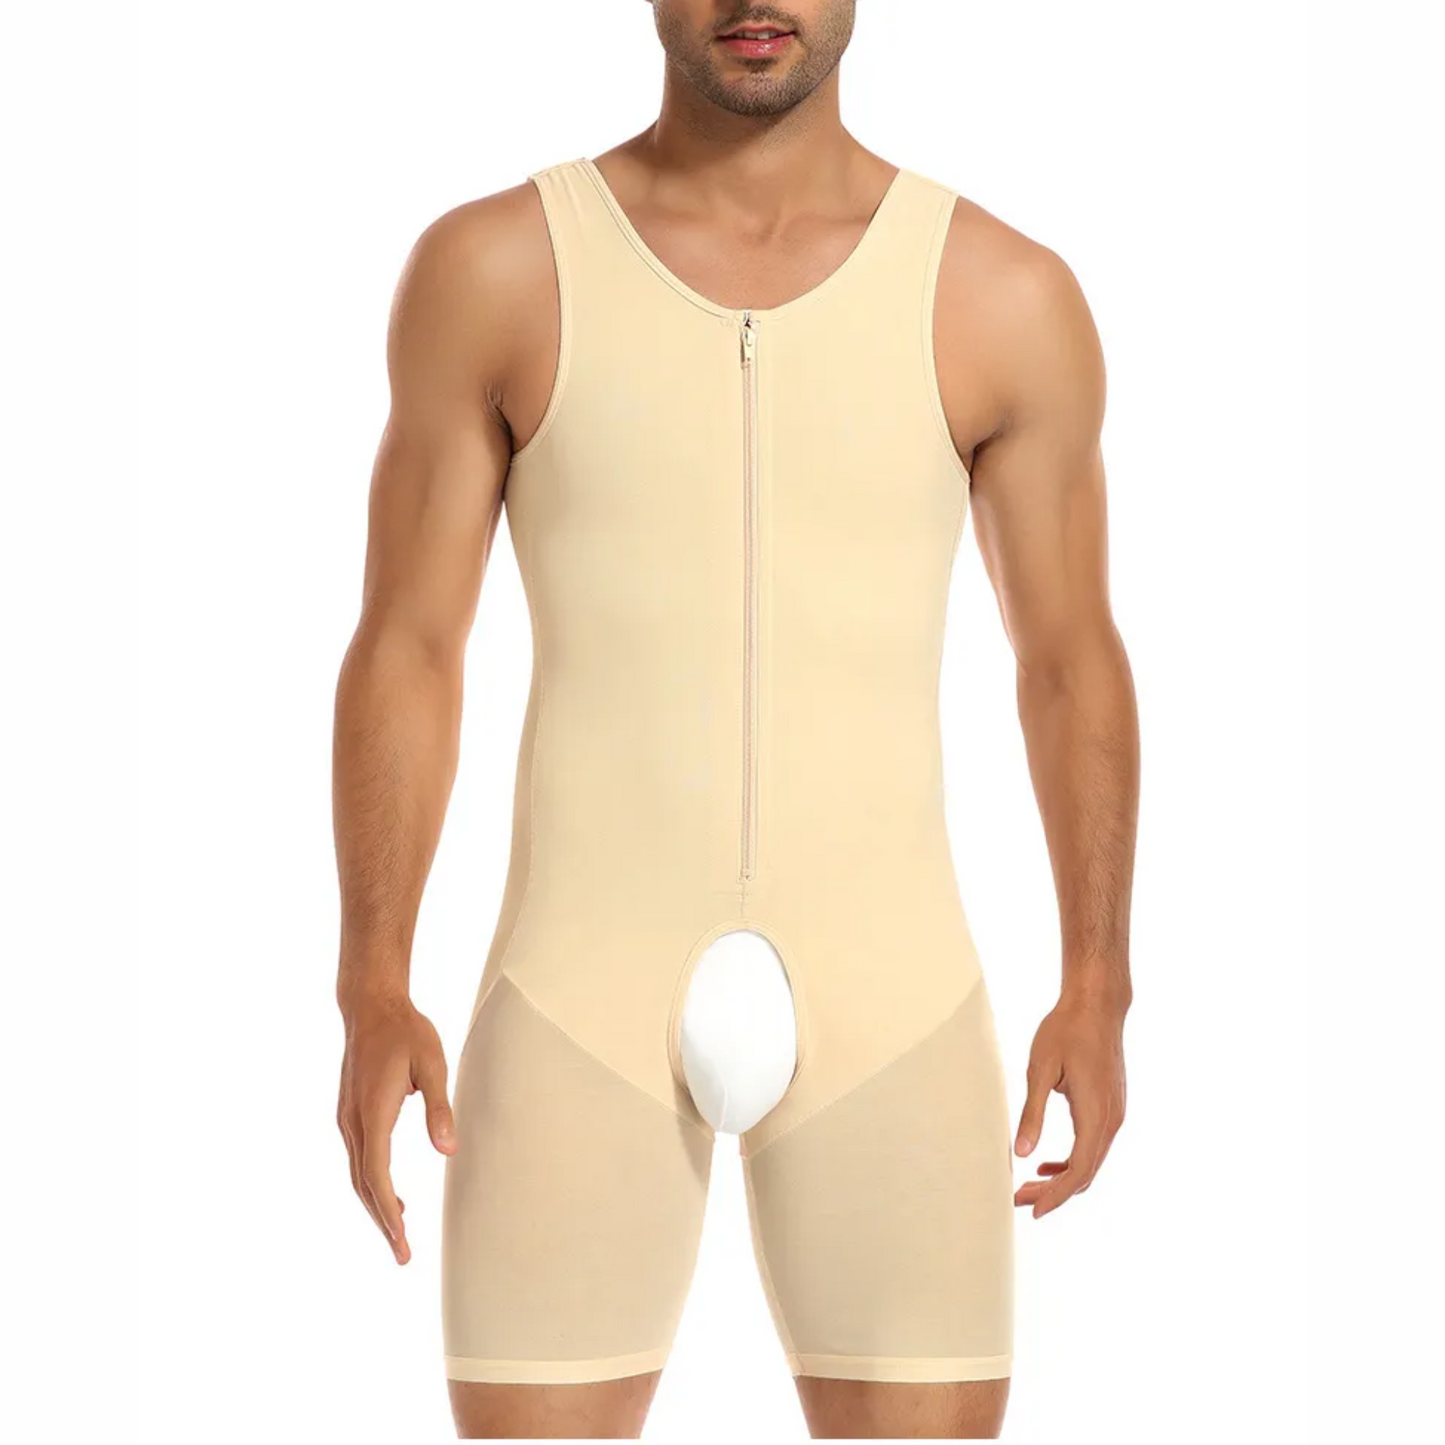 Men's Full Body Compression Shaper With Butt Pads